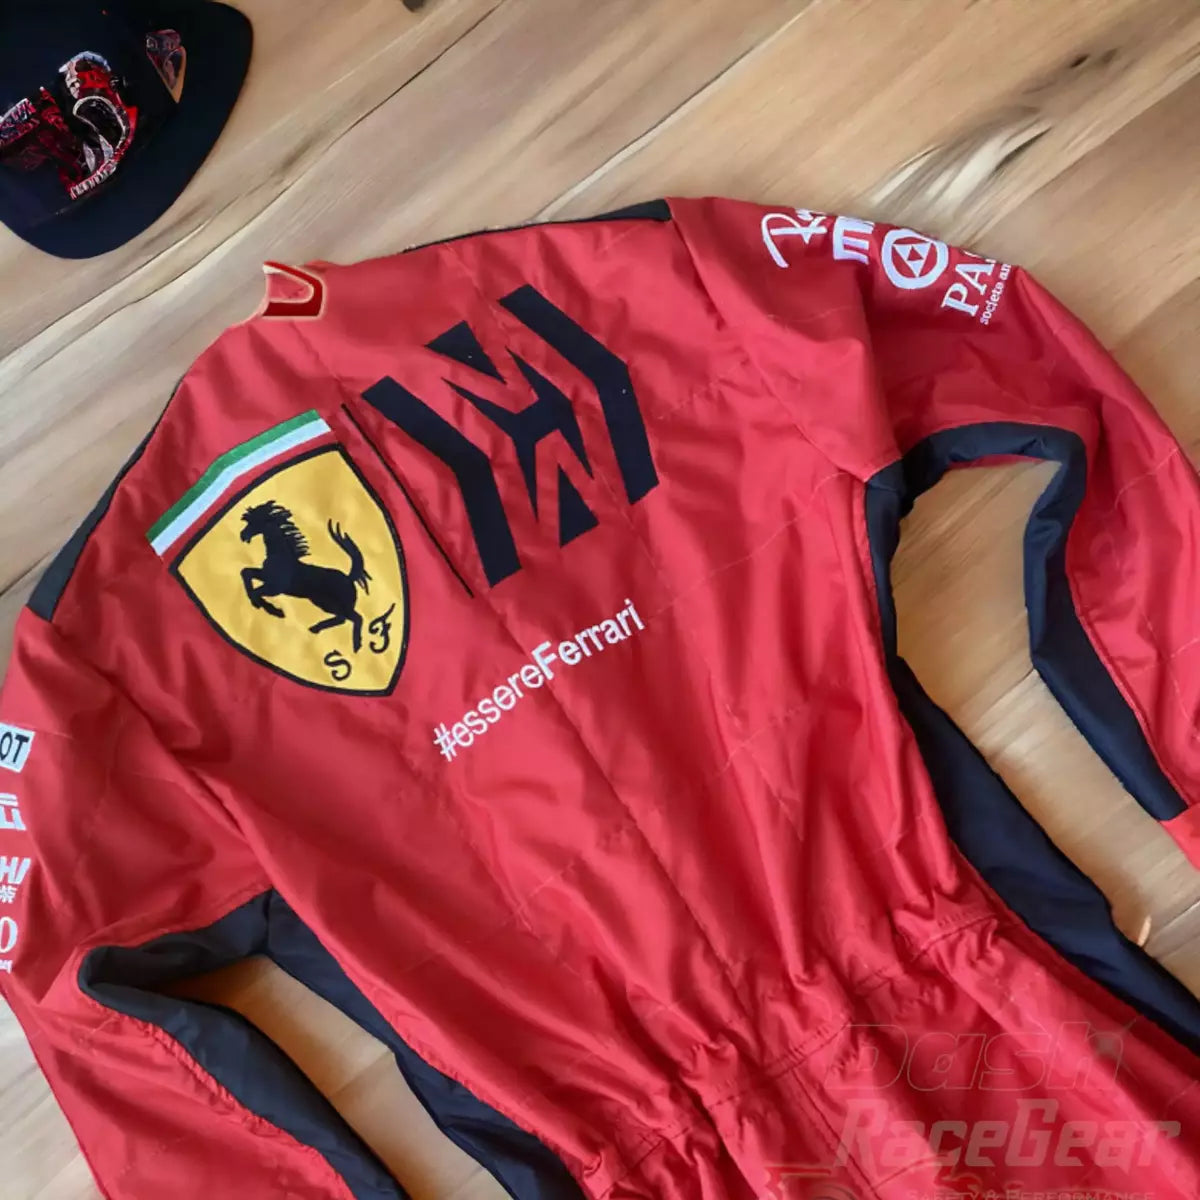 2020 Charles Leclerc Ferrari Mission Winnow F1 Embroidered Racing Suit